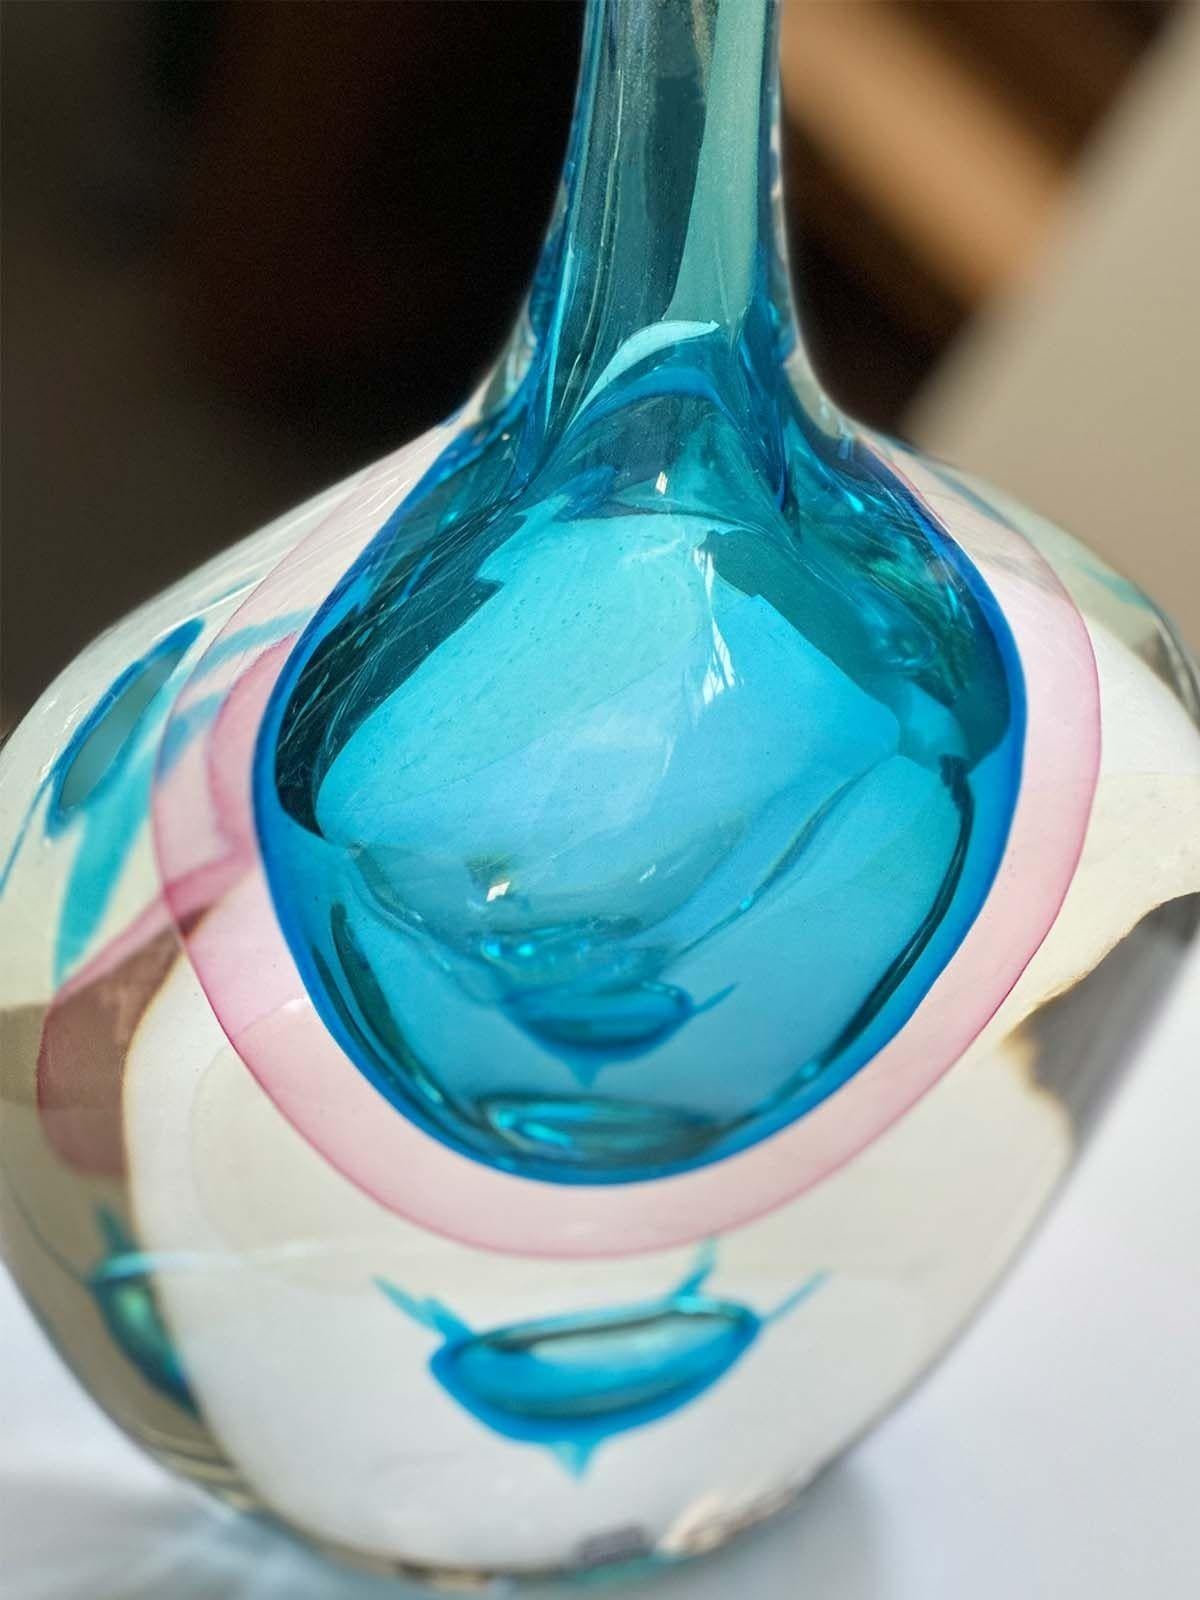 Vintage colorful Murano glass vase created in Italy in the 1970's by Fabio Tosi for Gino Cenedese. The Sommerso technique brings life to a harmonious fusion of clear, deep blue, and soft pink hues, encased in flawless glass layers, creating an